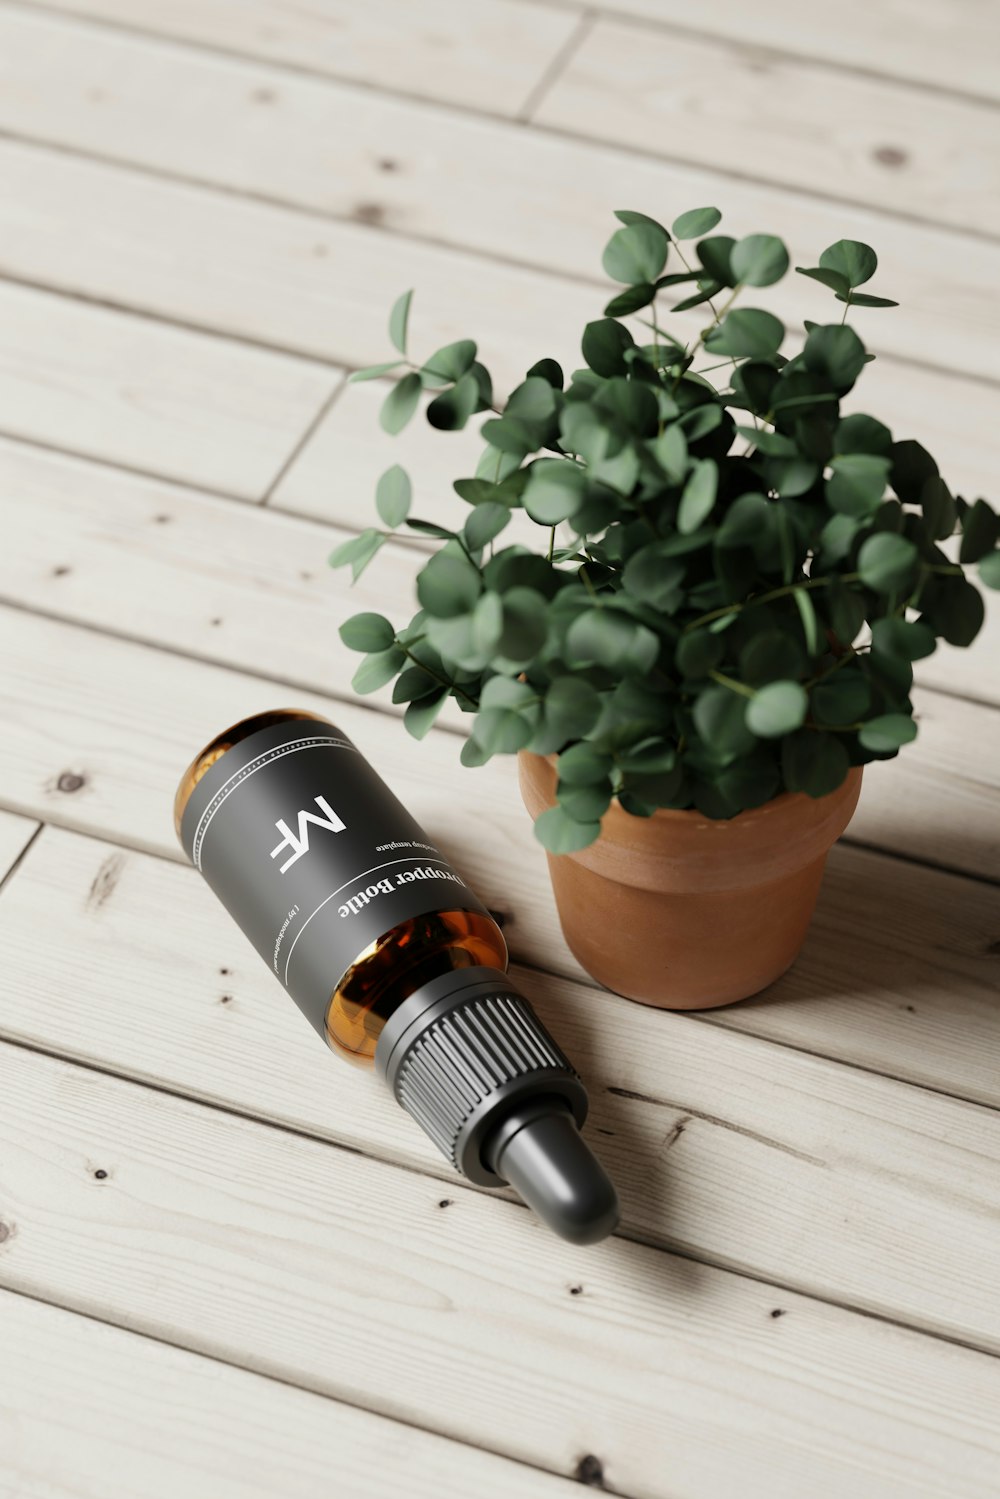 a bottle of essential oils next to a potted plant